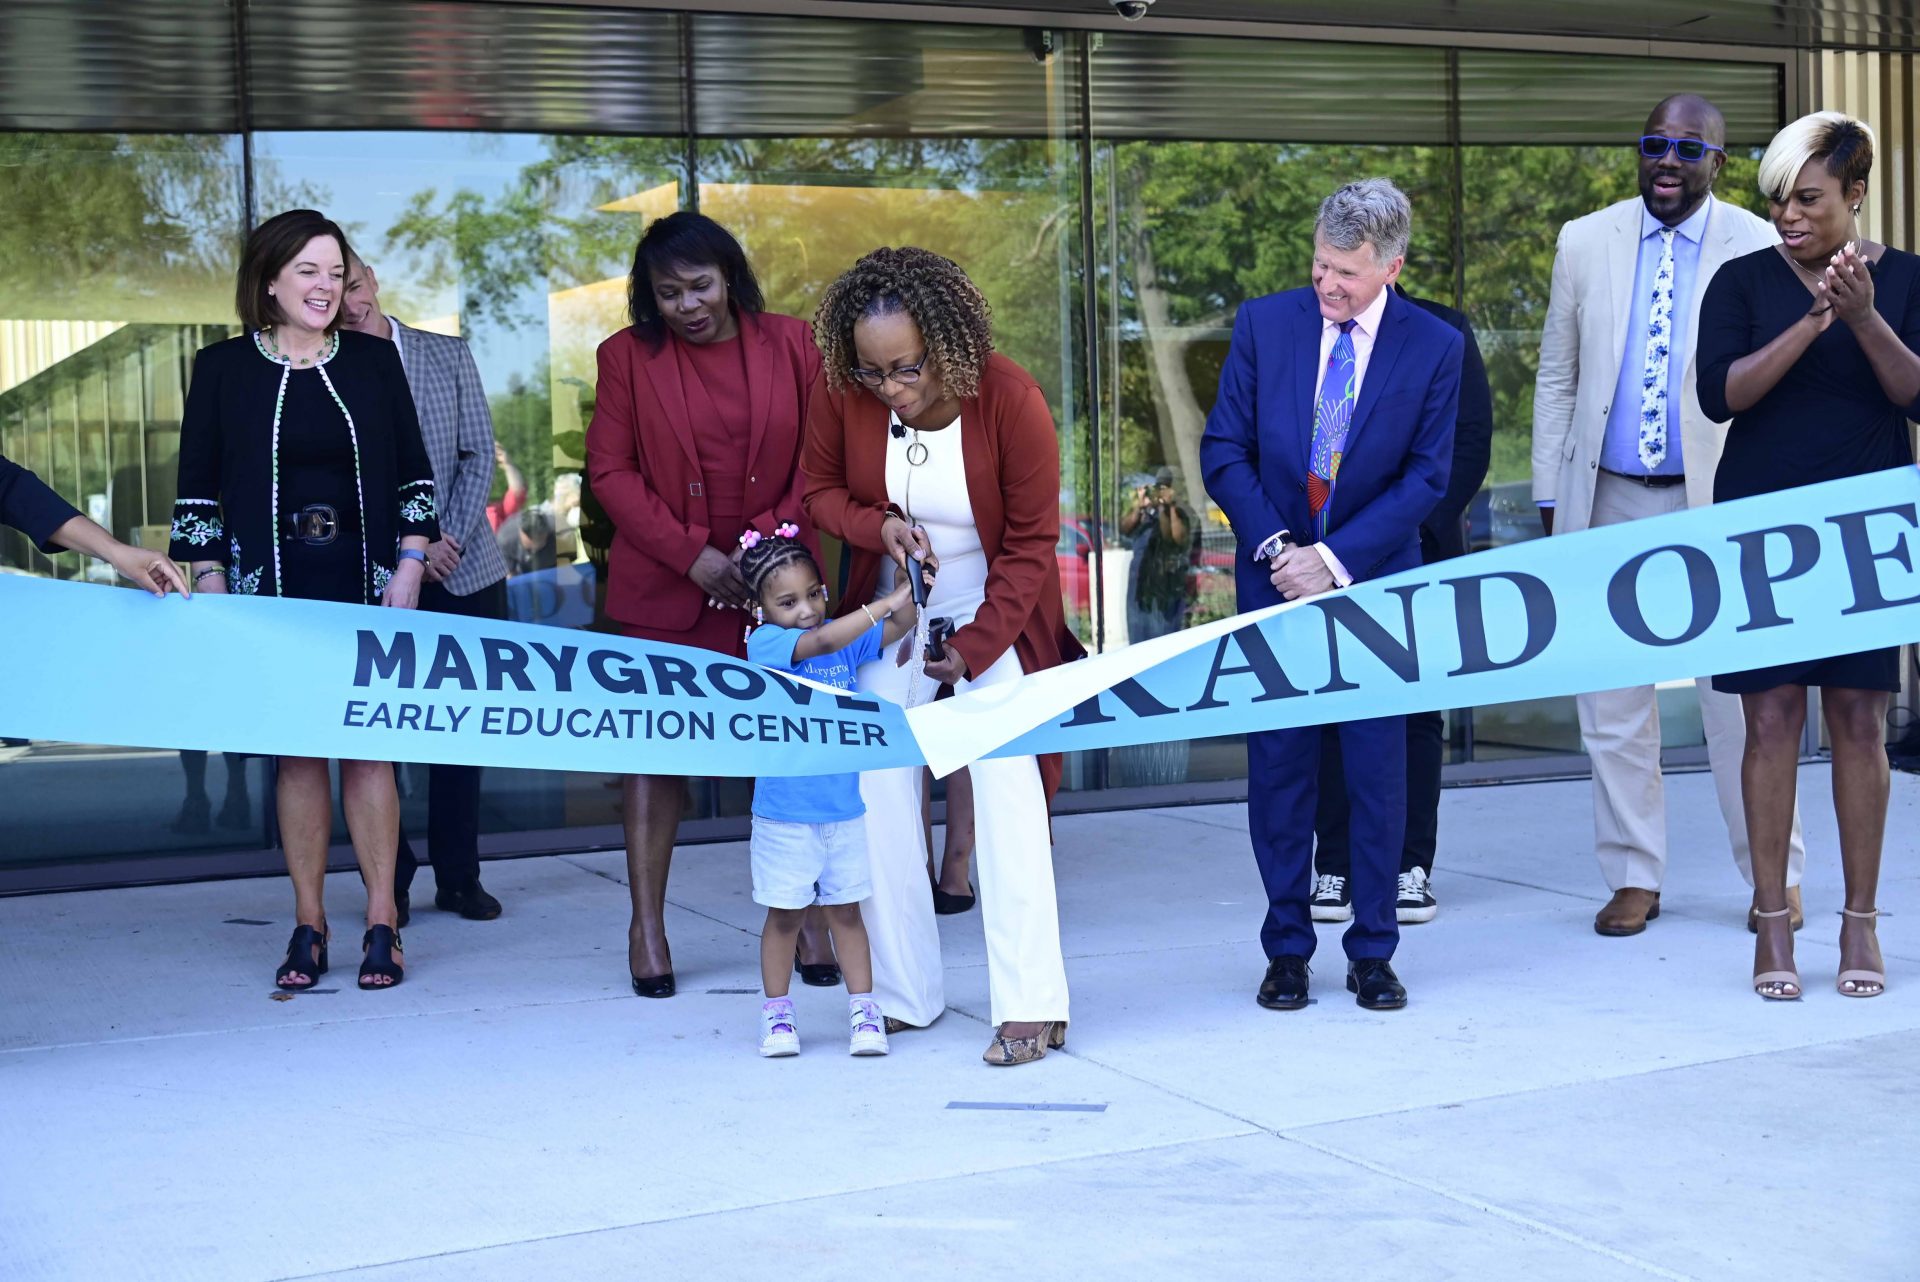 New State Of The Art Marygrove Early Education Center Celebrates Grand